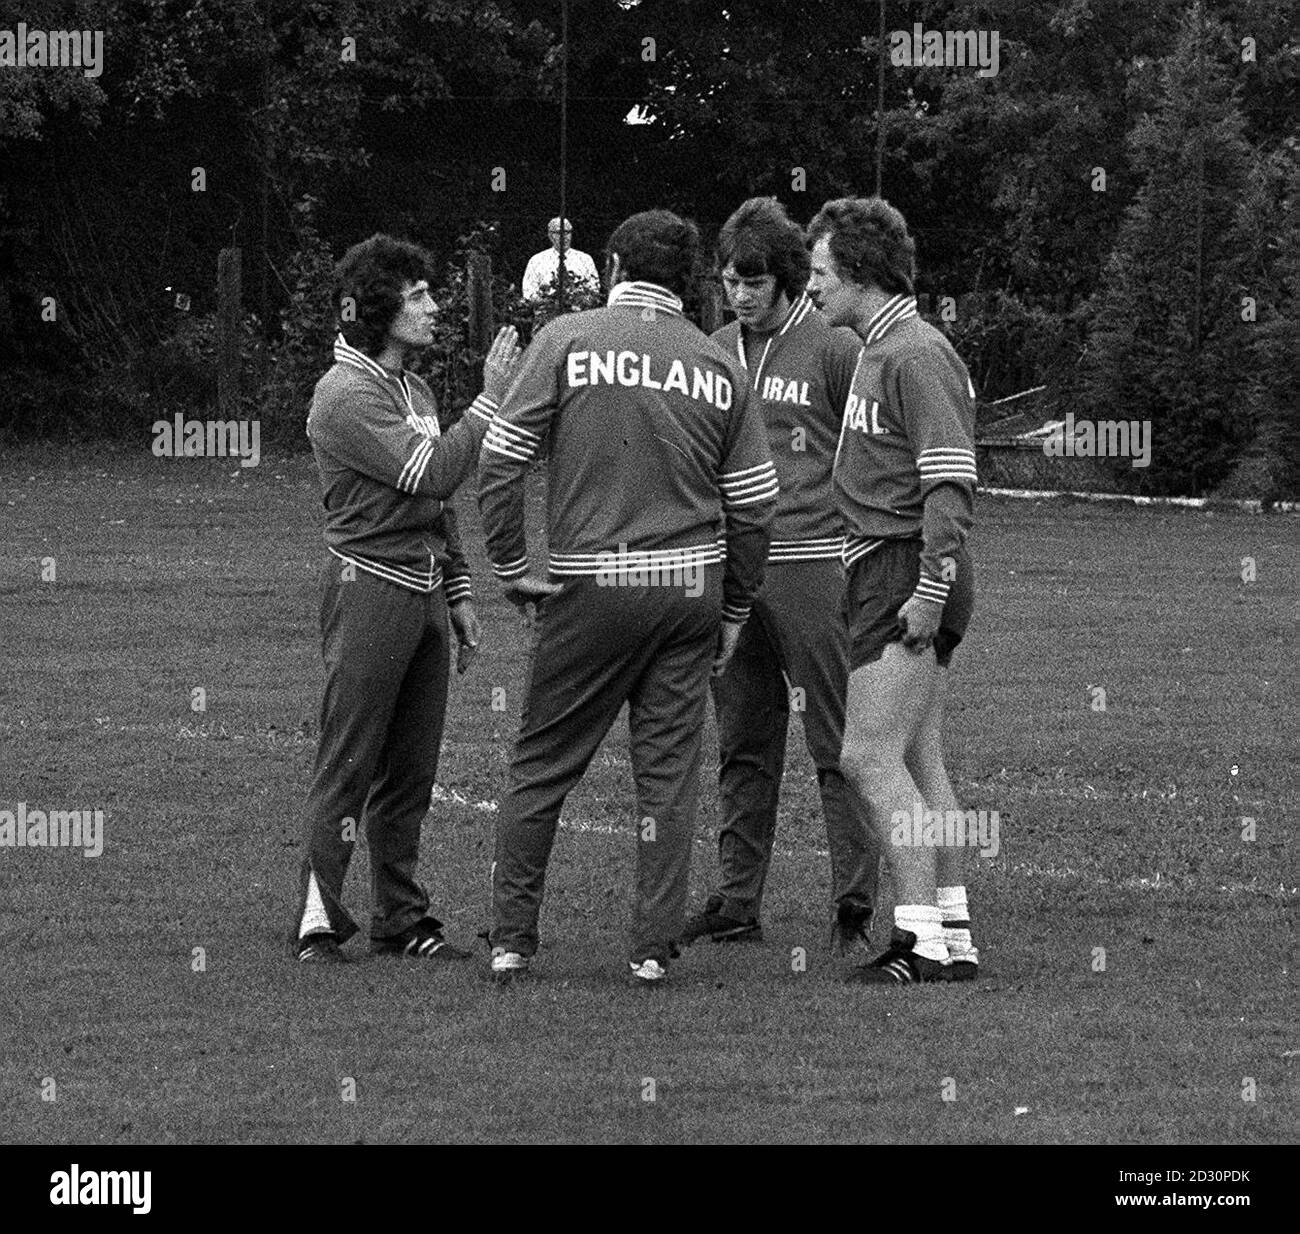 Liverpool's Kevin Keegan (left) puts his point of view during a tactical talk with (from left) manager Don Revie, Southampton's Mike Channon, and Manchester City's Joe Royle at the Dame Alice Owen School ground at Whetstone. * England are preparing for the World Cup qualifying match against Finland at Wembley. Stock Photo